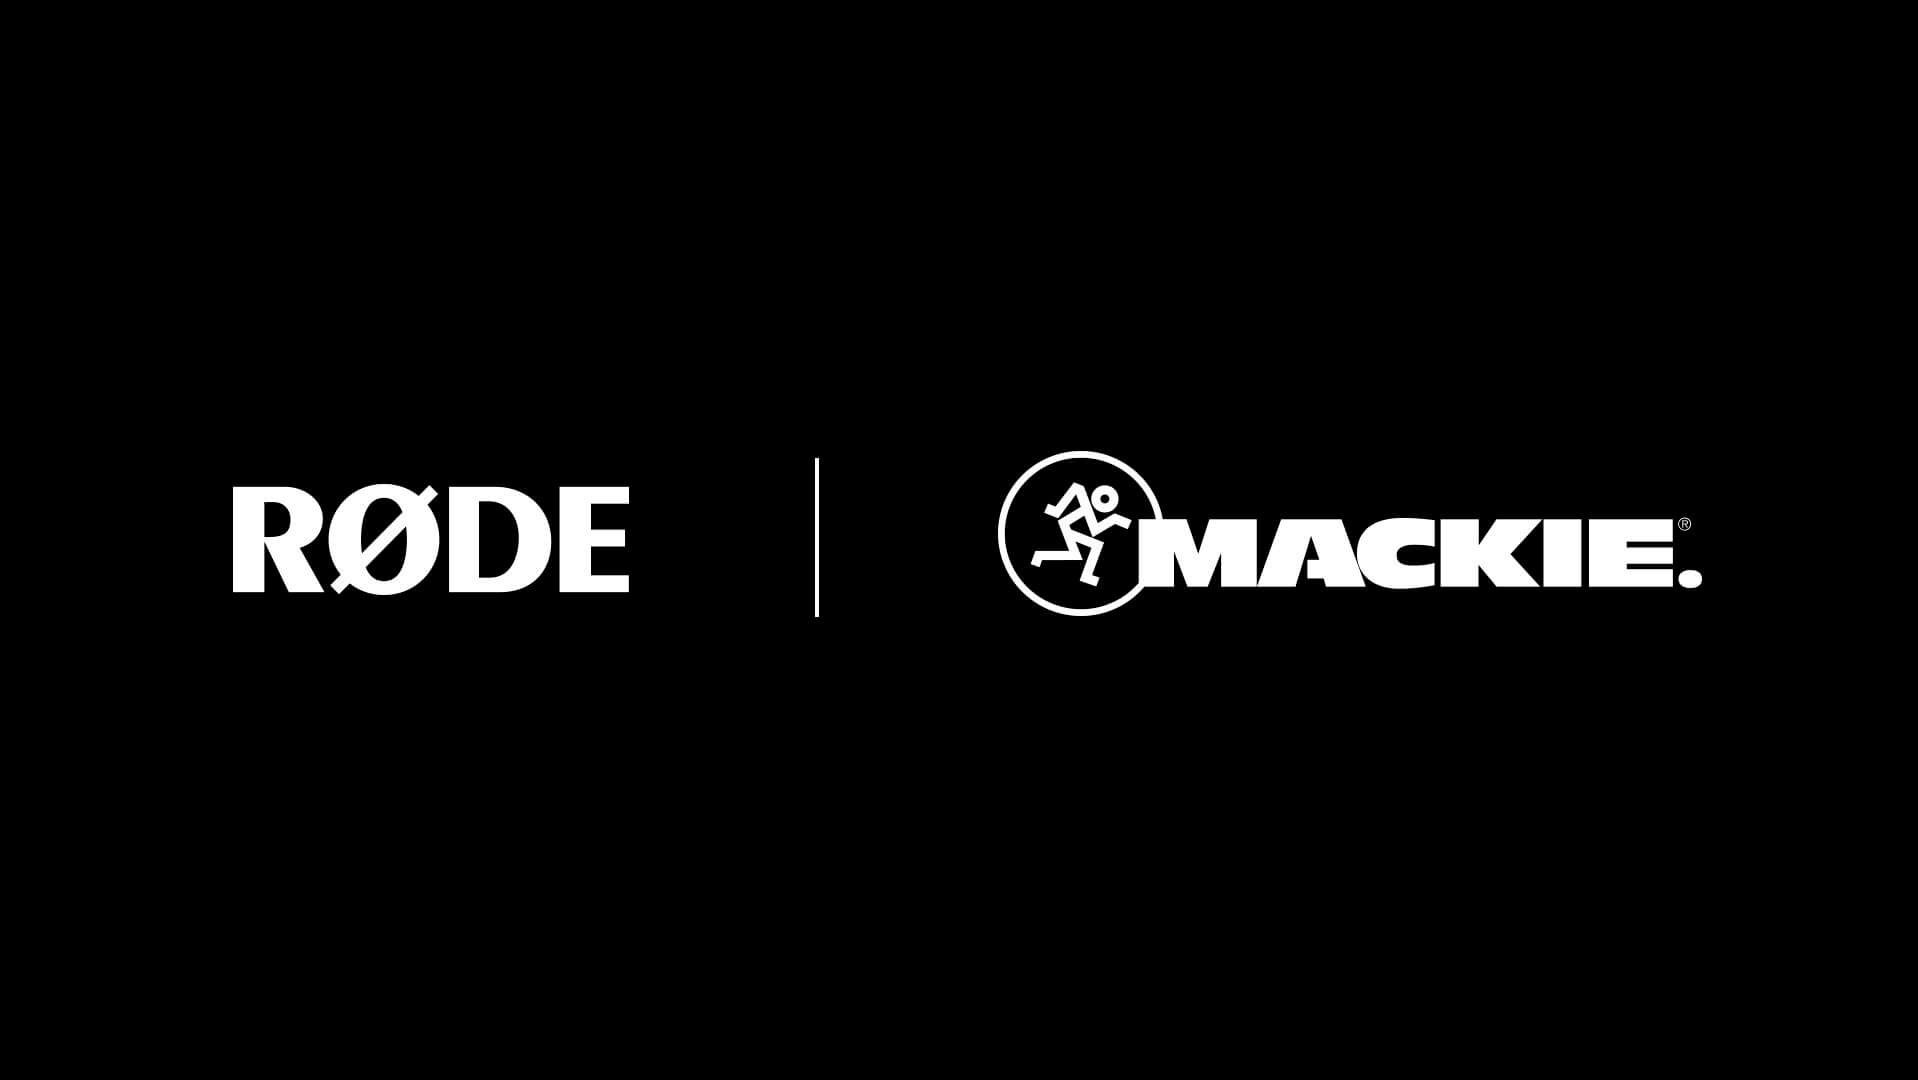 RØDE and Mackie logo side-by-side